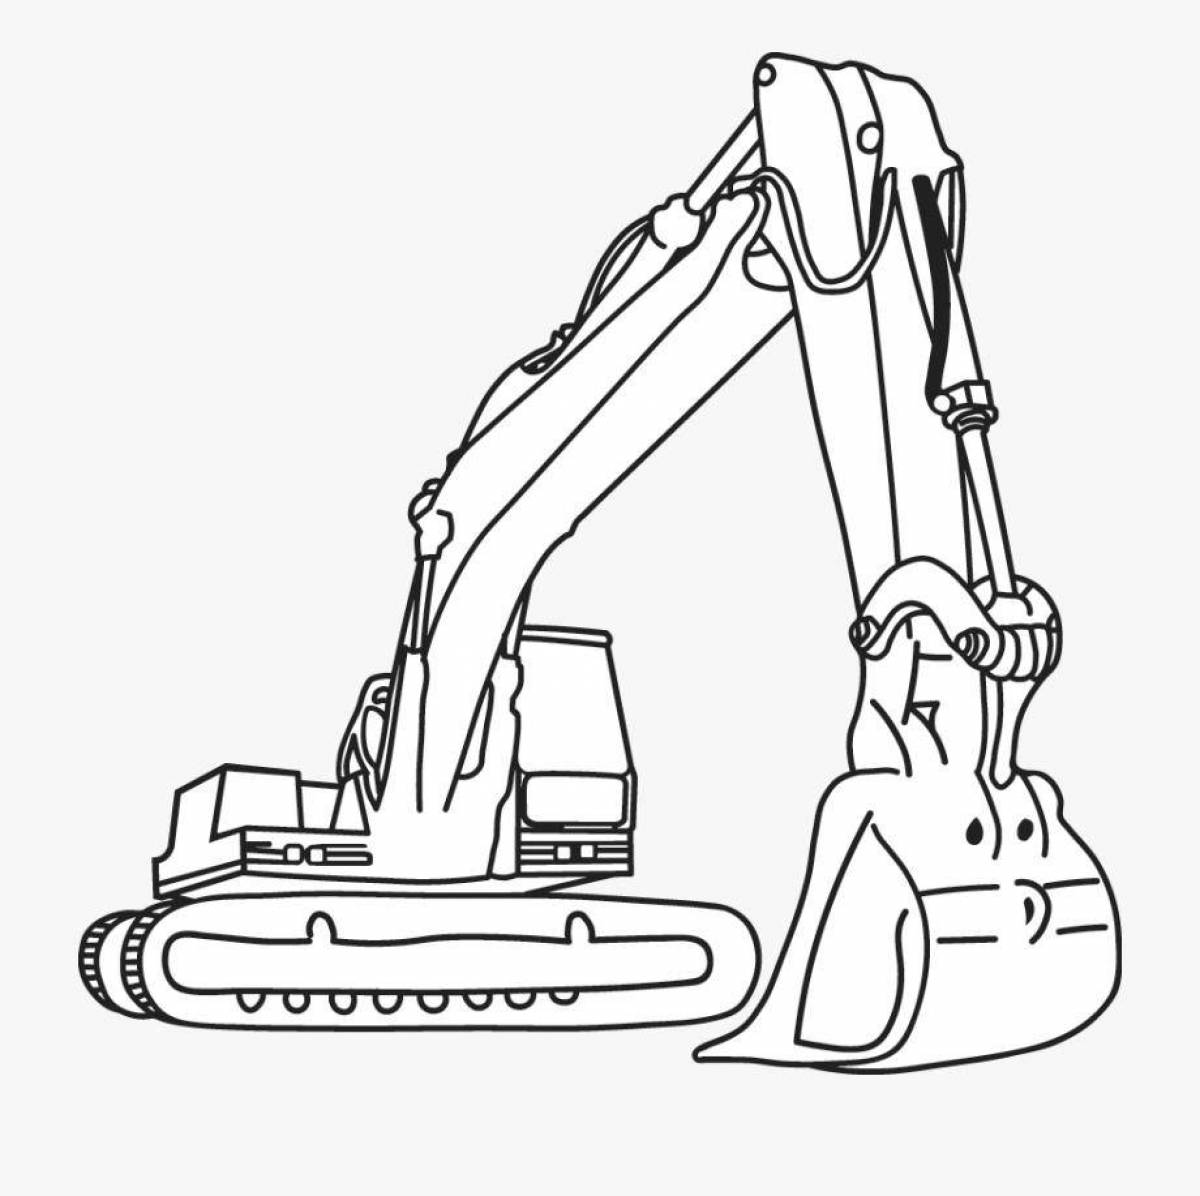 Coloring excavator for children 4-5 years old